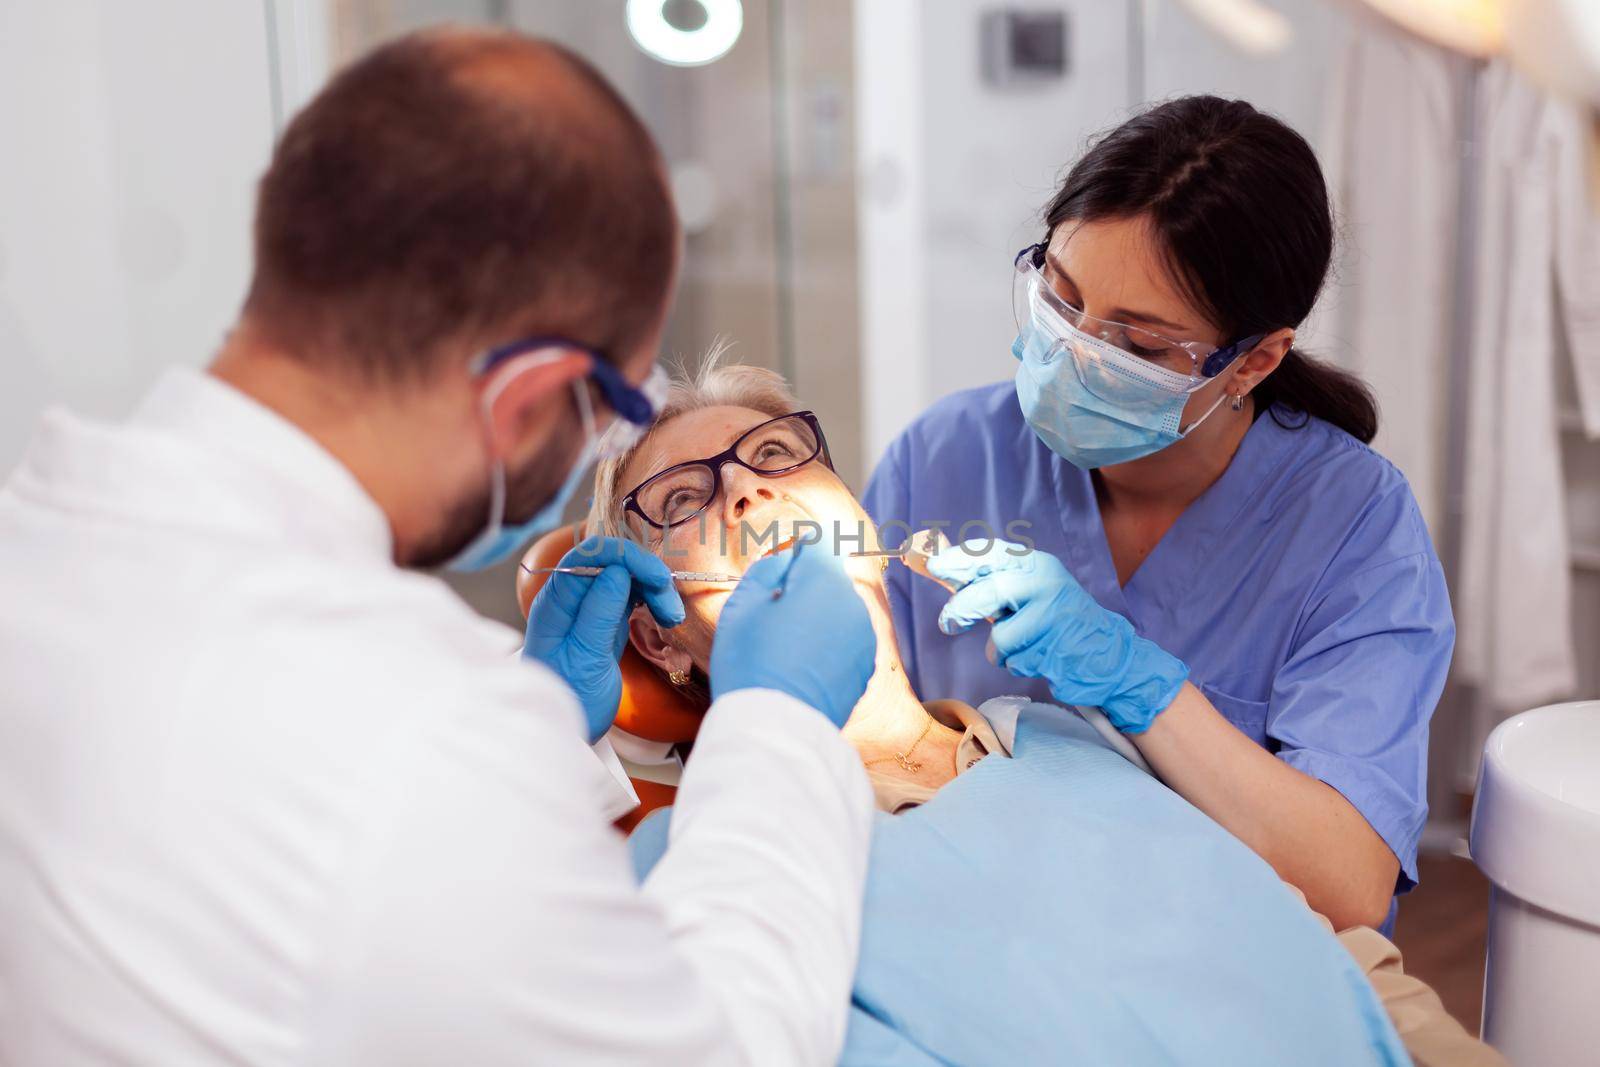 Nurse helping stomatolog during teeth treatment of senior woman. Elderly patient during medical examination with dentist in dental office with orange equipment.